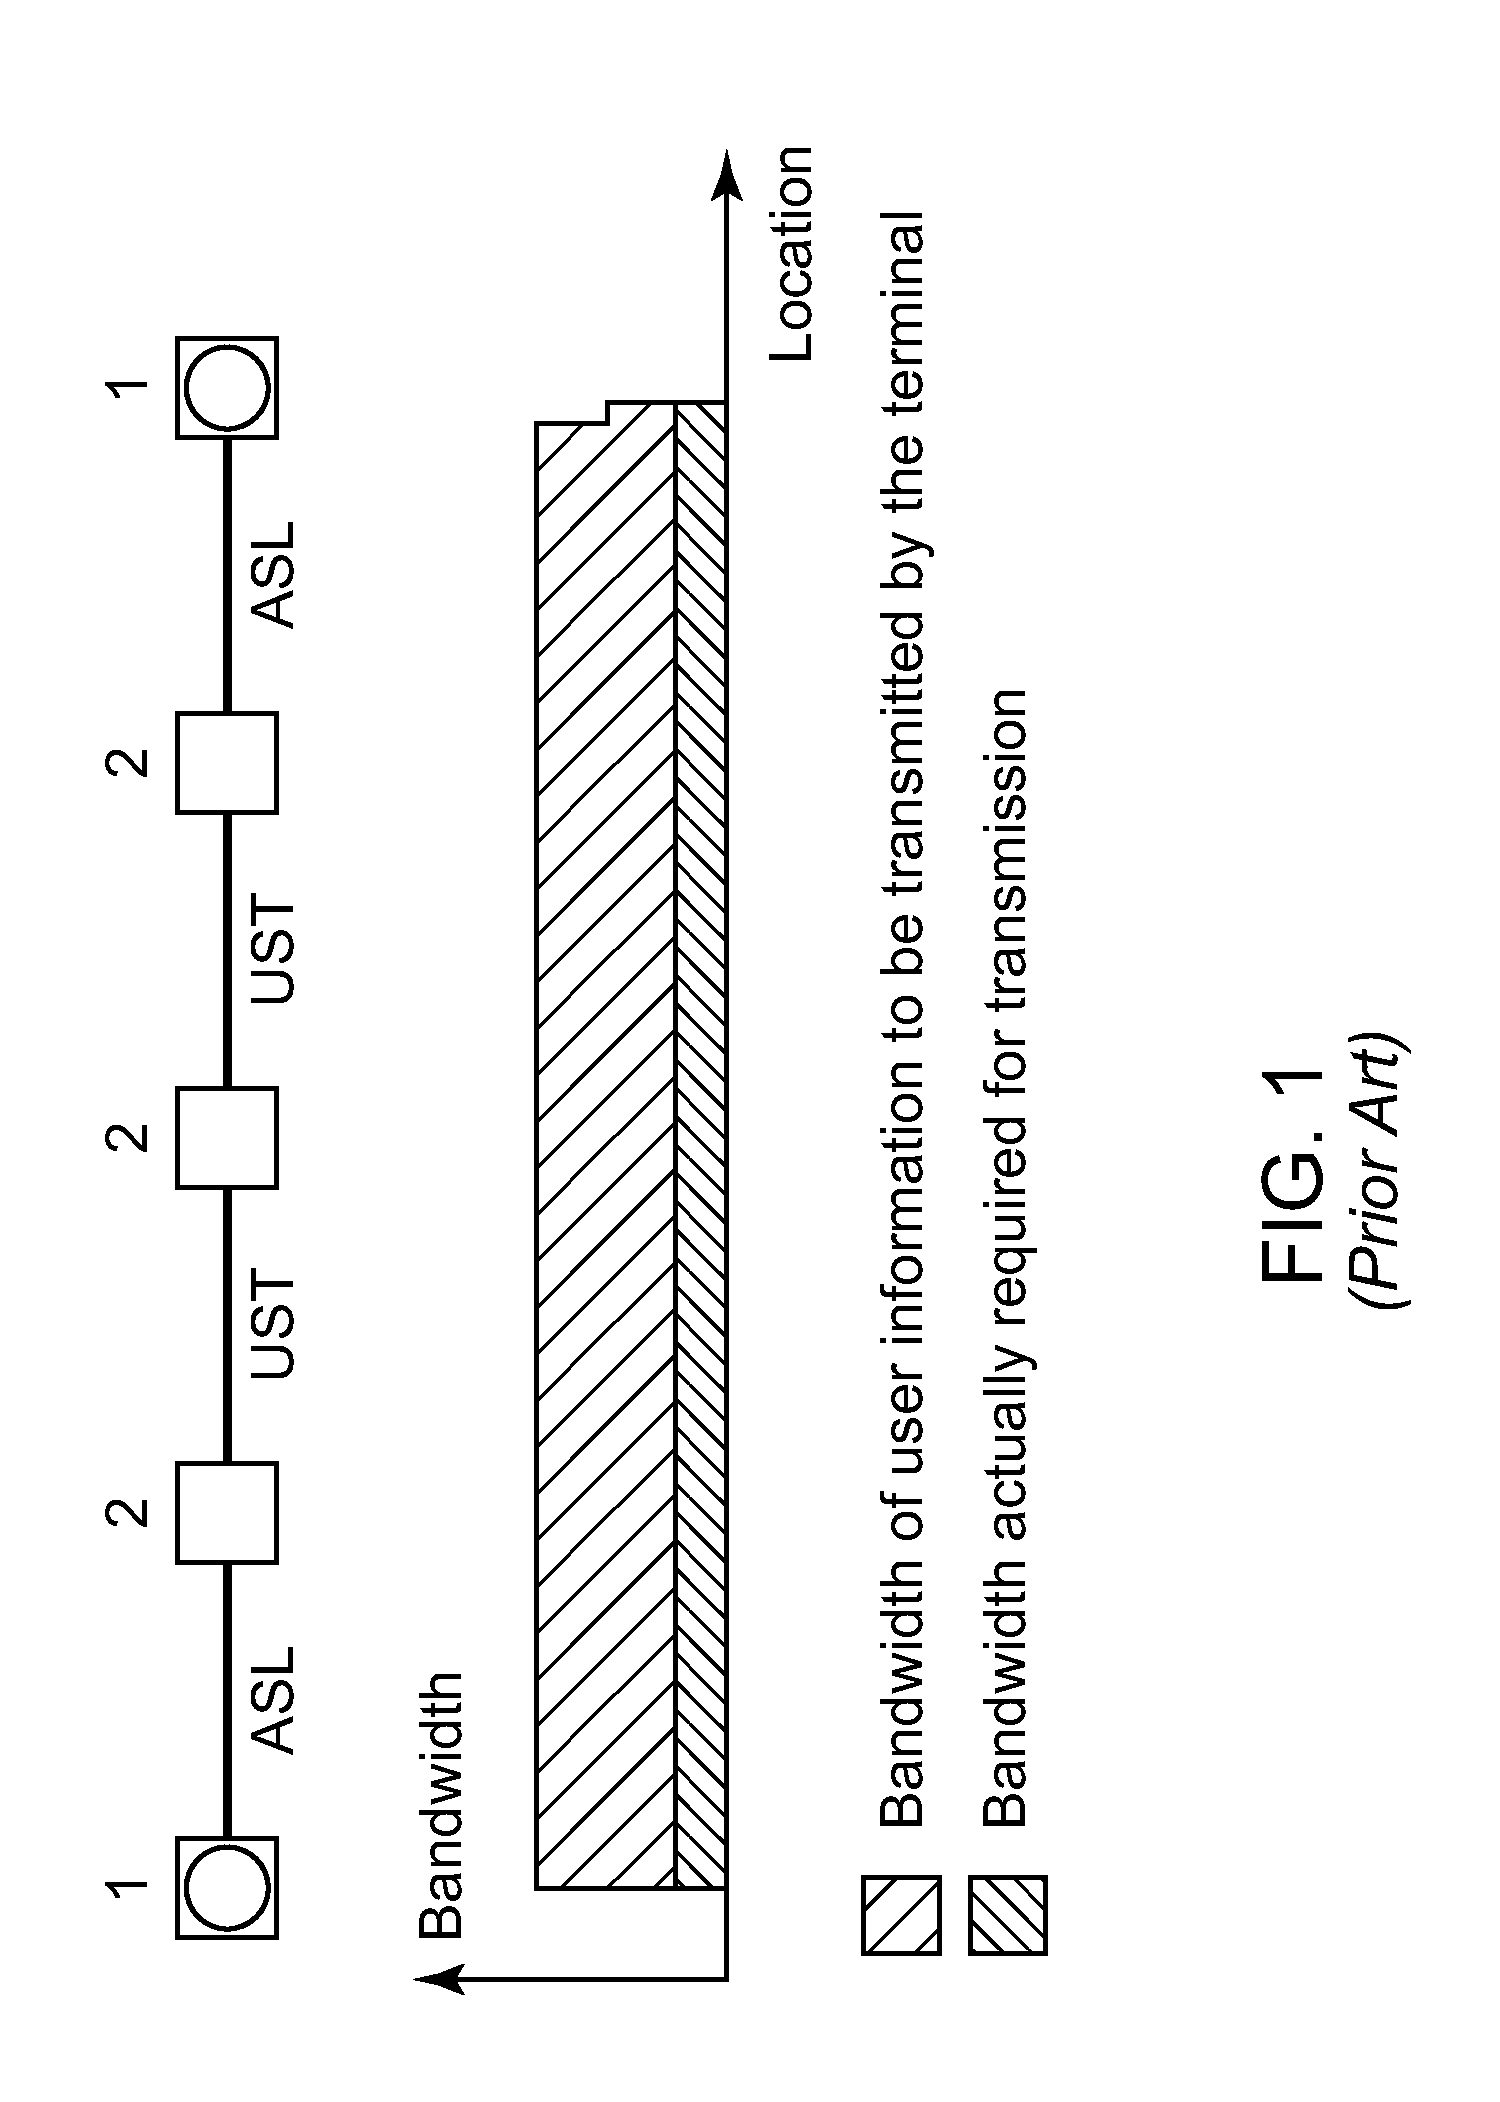 Method for using digital data networks for the transmission of data via voice connection paths